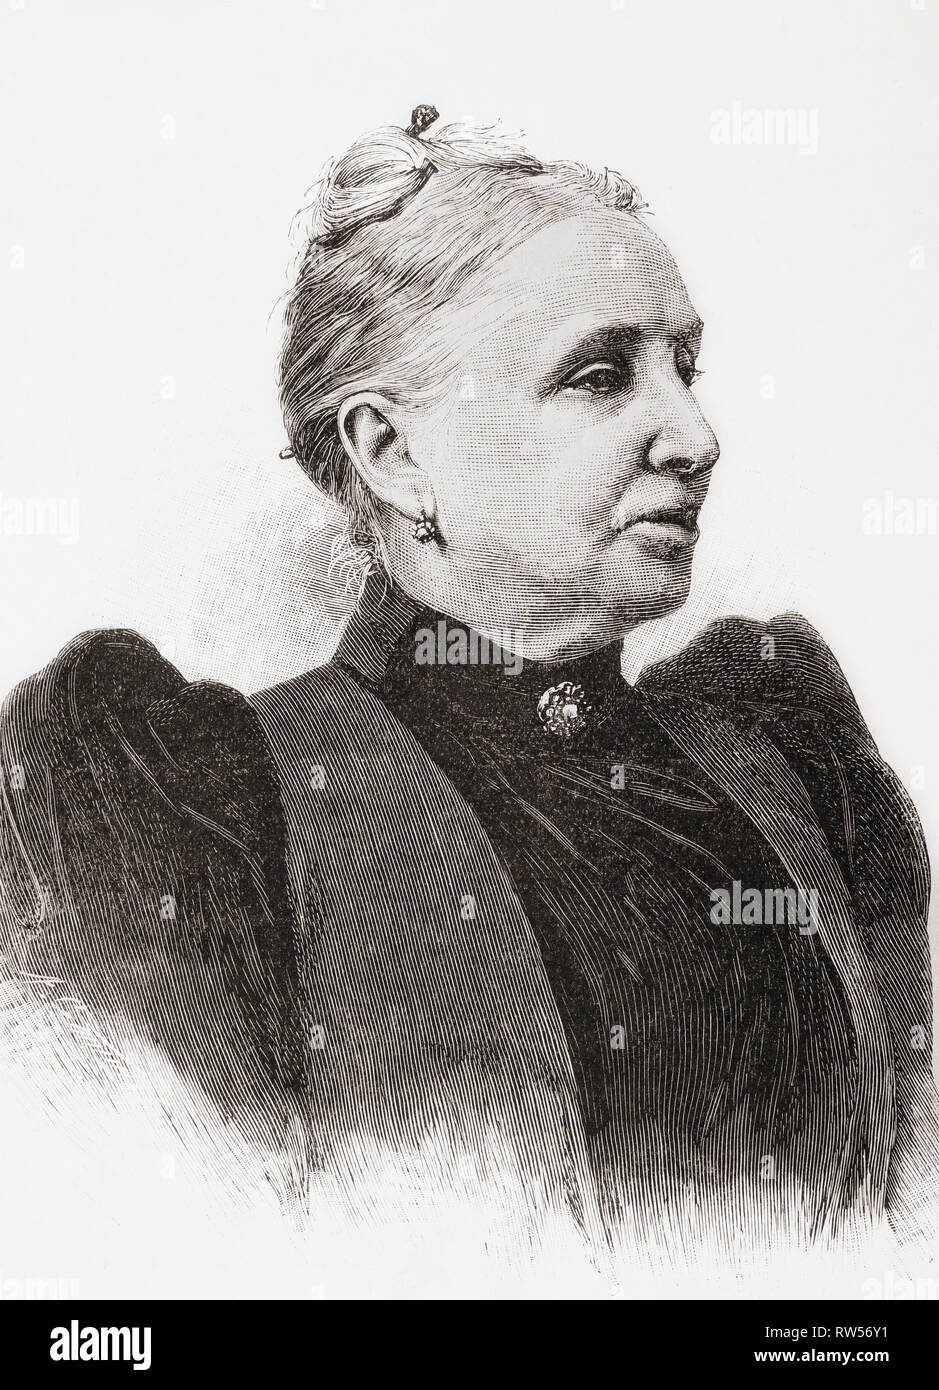 Soledad Acosta Kemble, 1833 – 1913.  Colombian writer and journalist.  From La Ilustracion Artistica, published 1887. Stock Photo